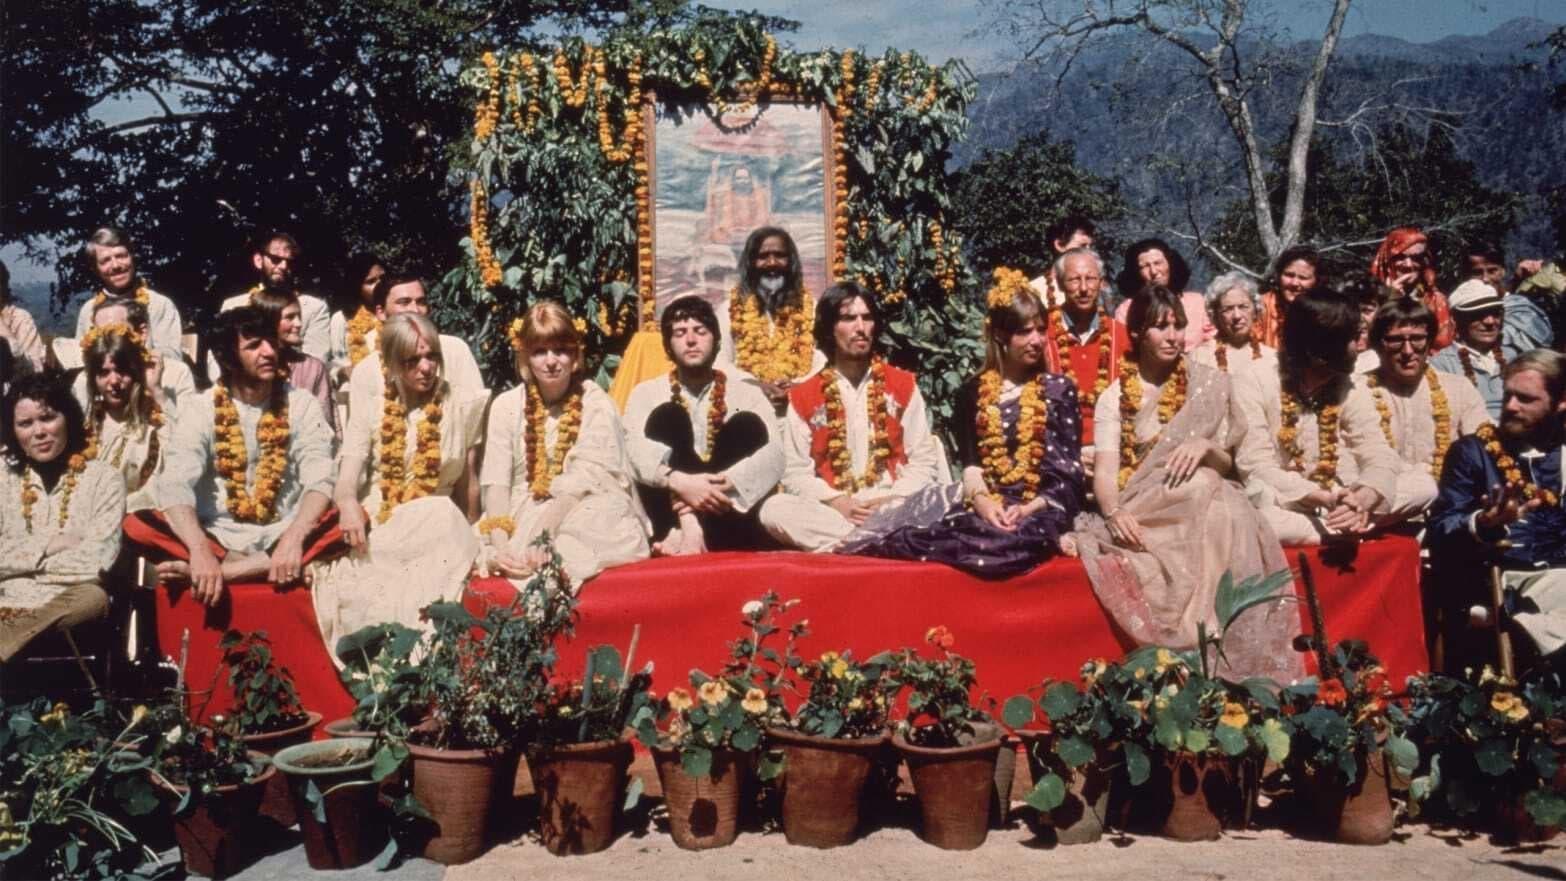 Meeting the Beatles in India backdrop